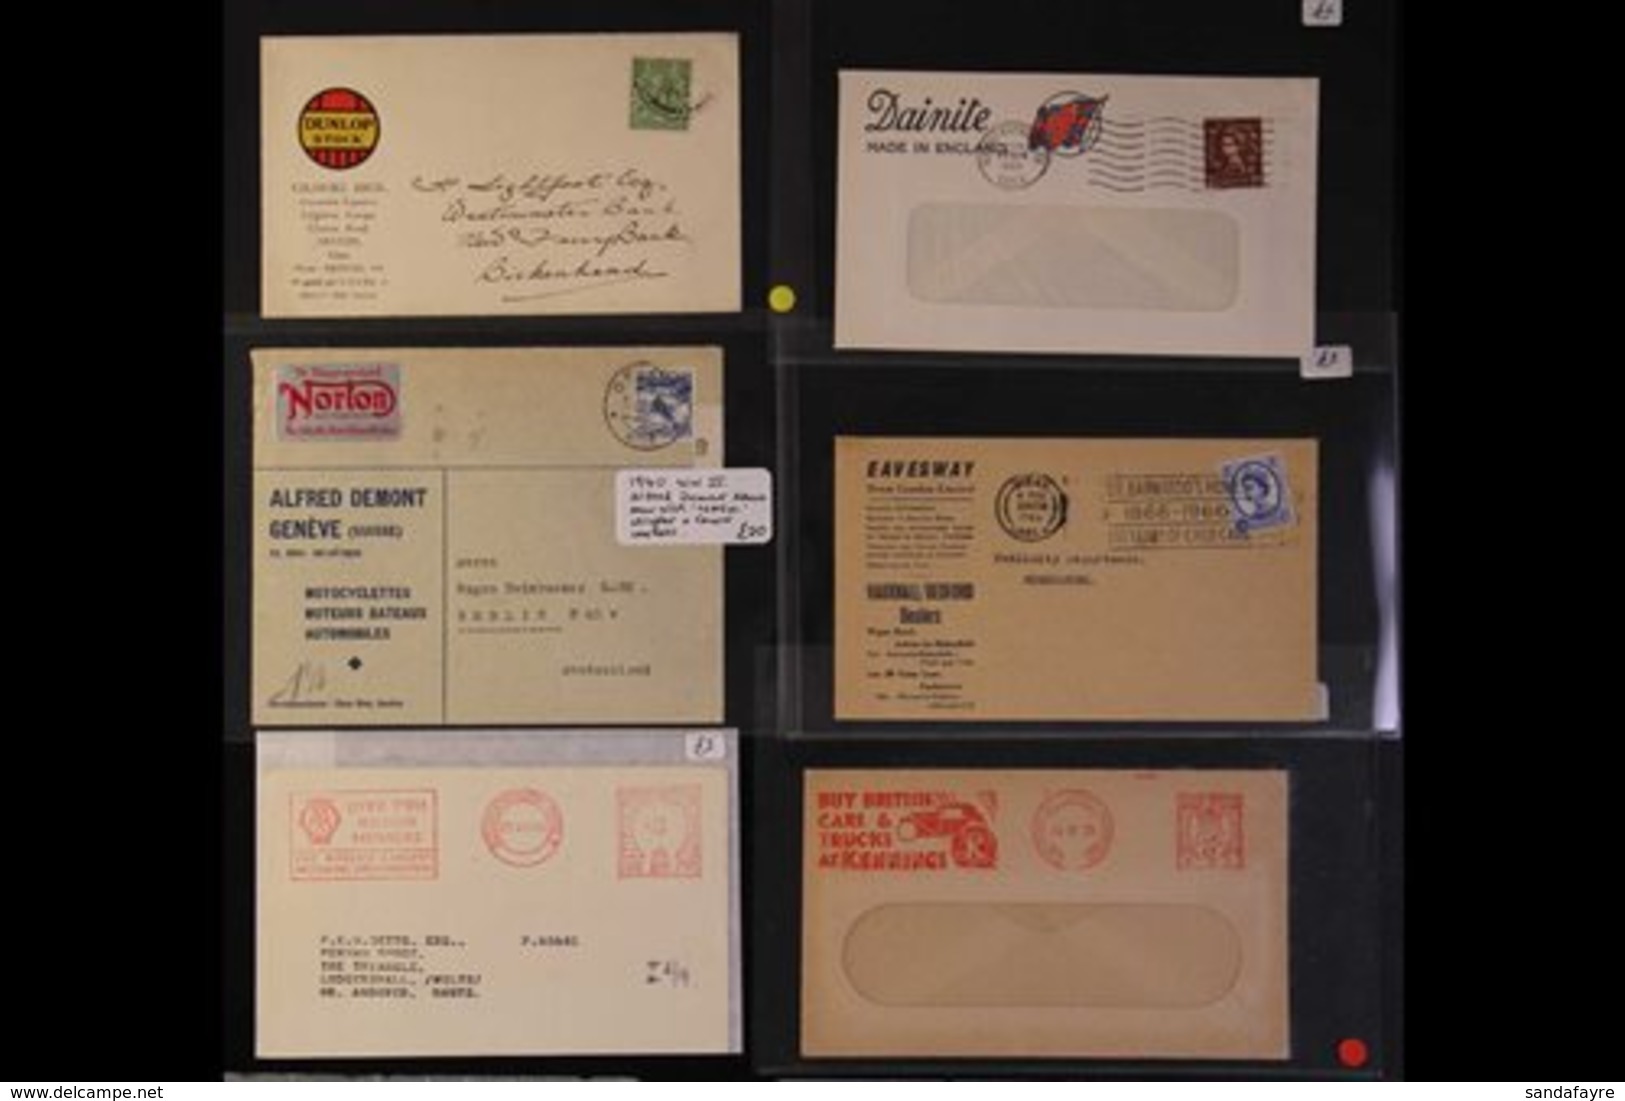 CARS & MOTORING ADVERTISING ENVELOPES & METER MAIL We Note Interesting Group Of Covers, With Advert Envs For Dunlop, Sco - Unclassified